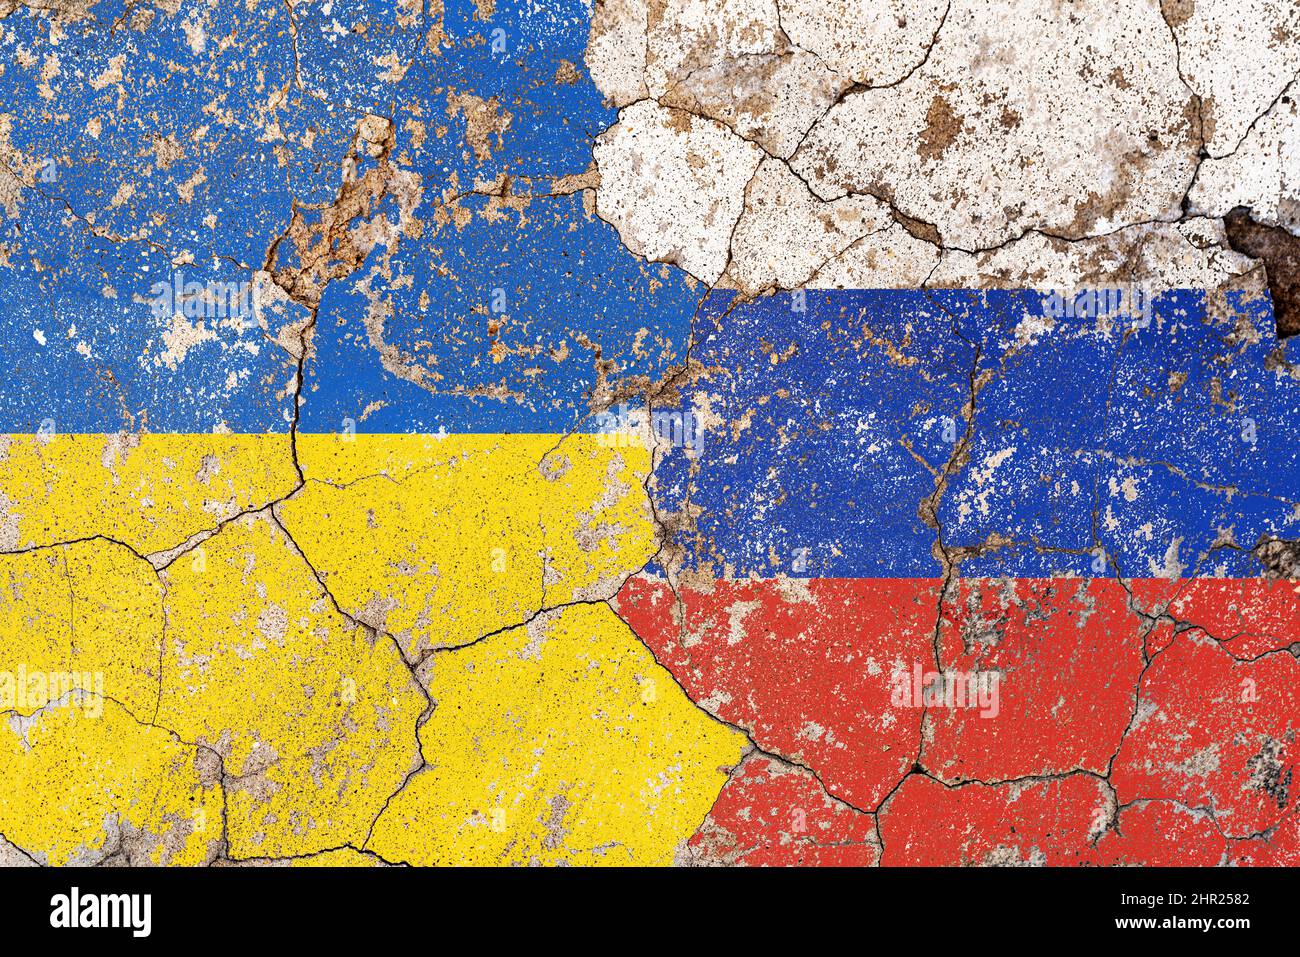 Closeup, flags of Ukraine against Russia on a cracked brick wall background. Concept of crisis of war and political conflicts between nations.  Stock Photo